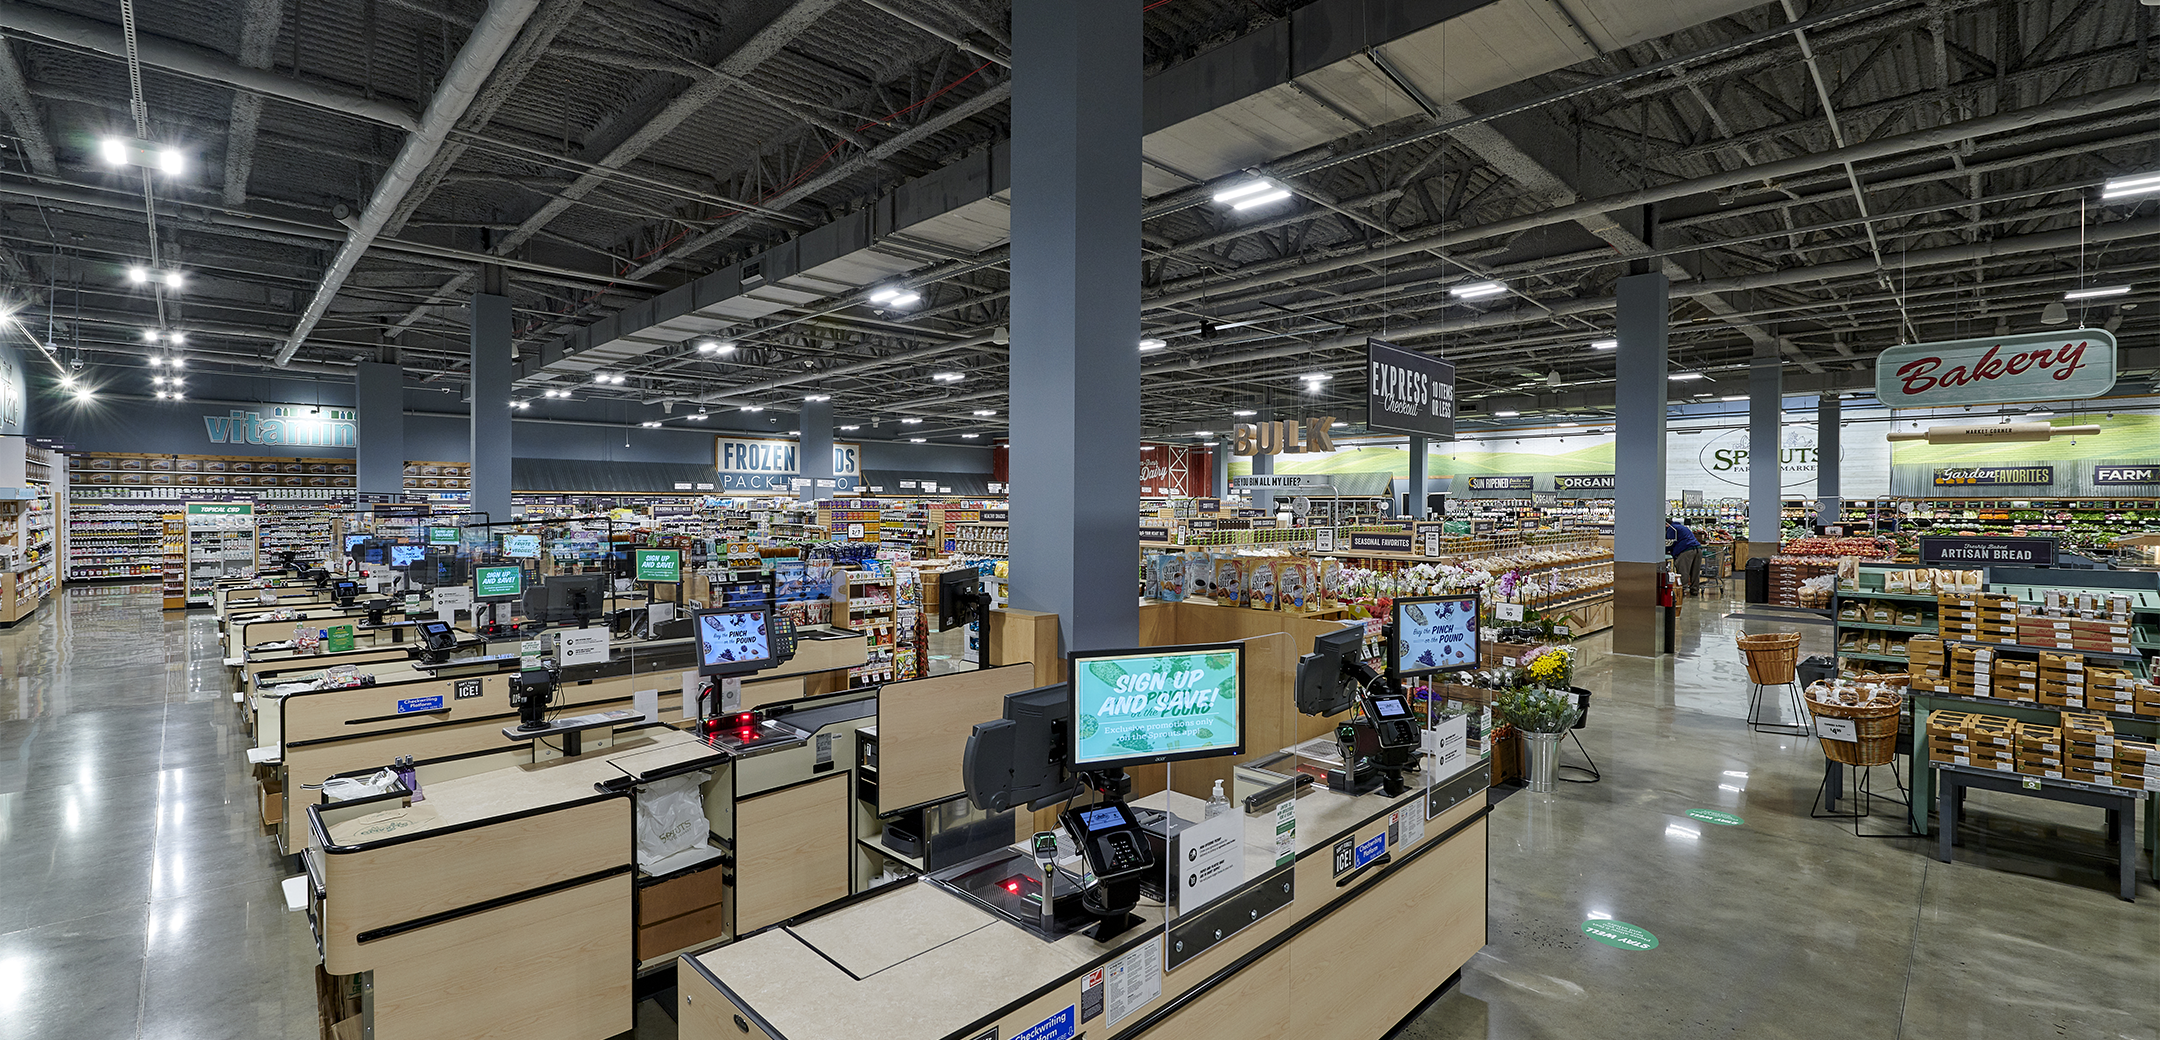 An interior view of the Sprouts Farmers Market showcasing the blue support pillars, tall ceiling, shelves with food and cash registers in the foreground.